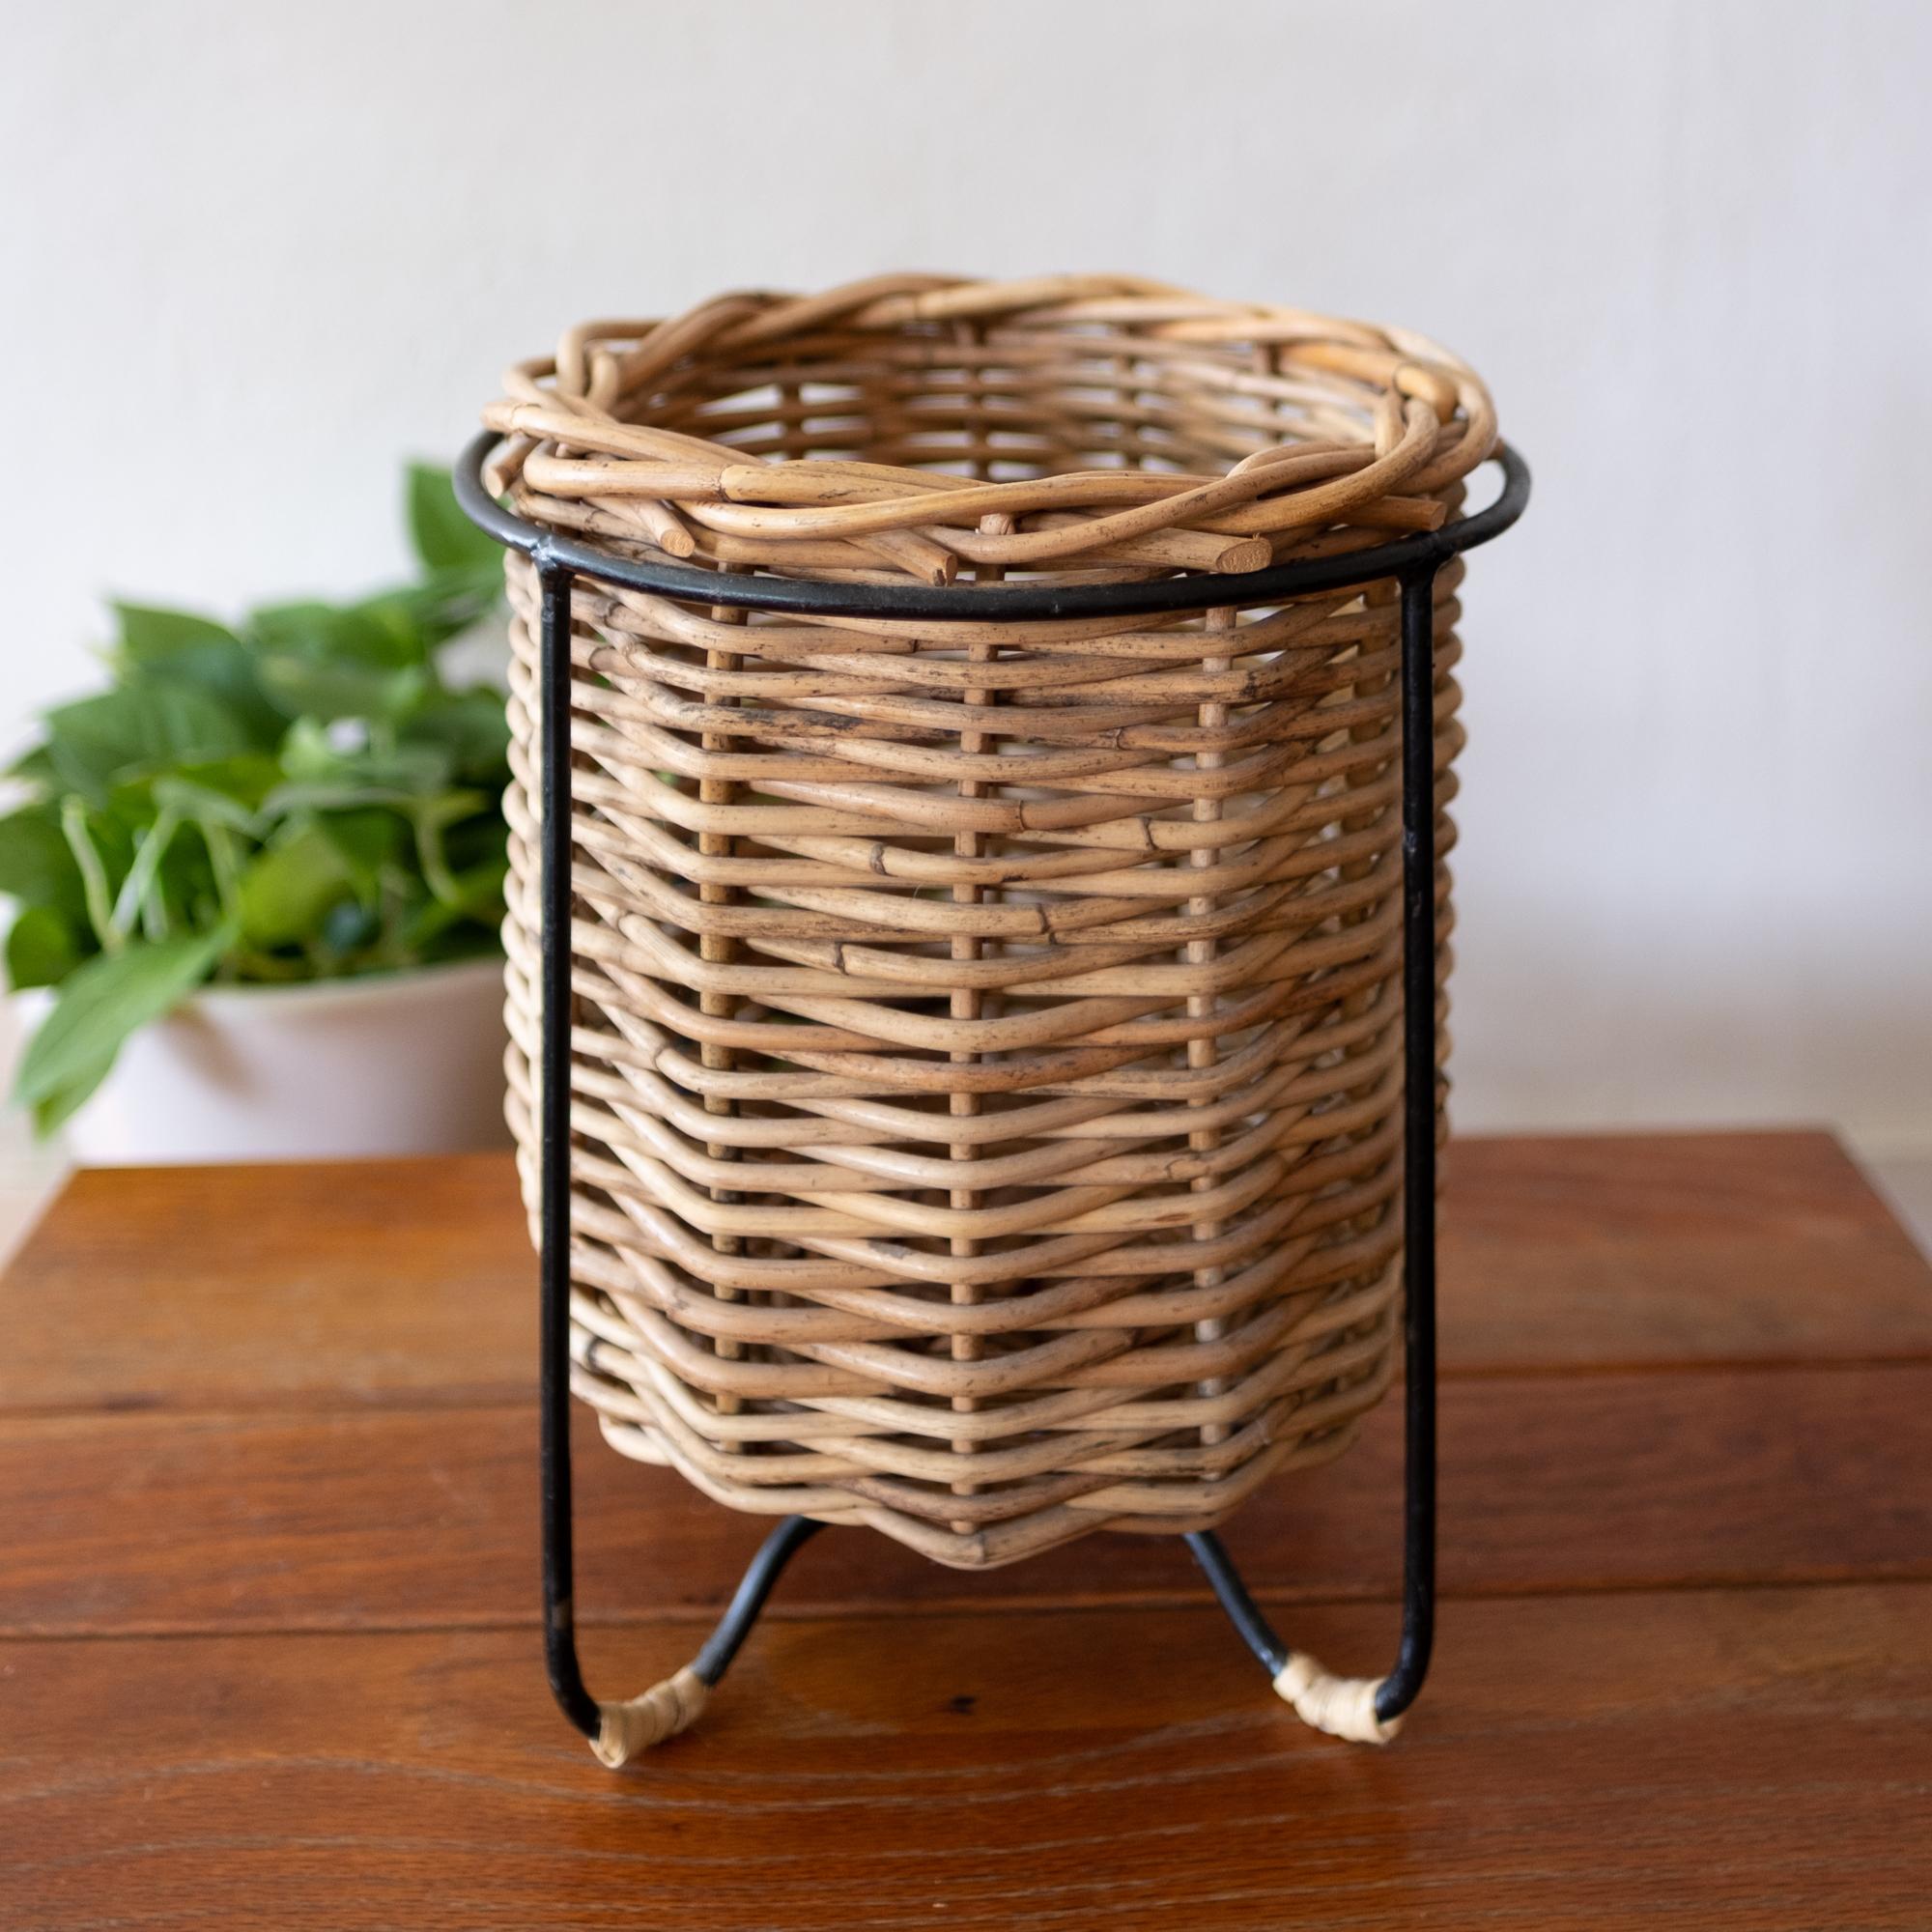 Iron reed and cane wastebasket, trash can or catch-all, 1960s.